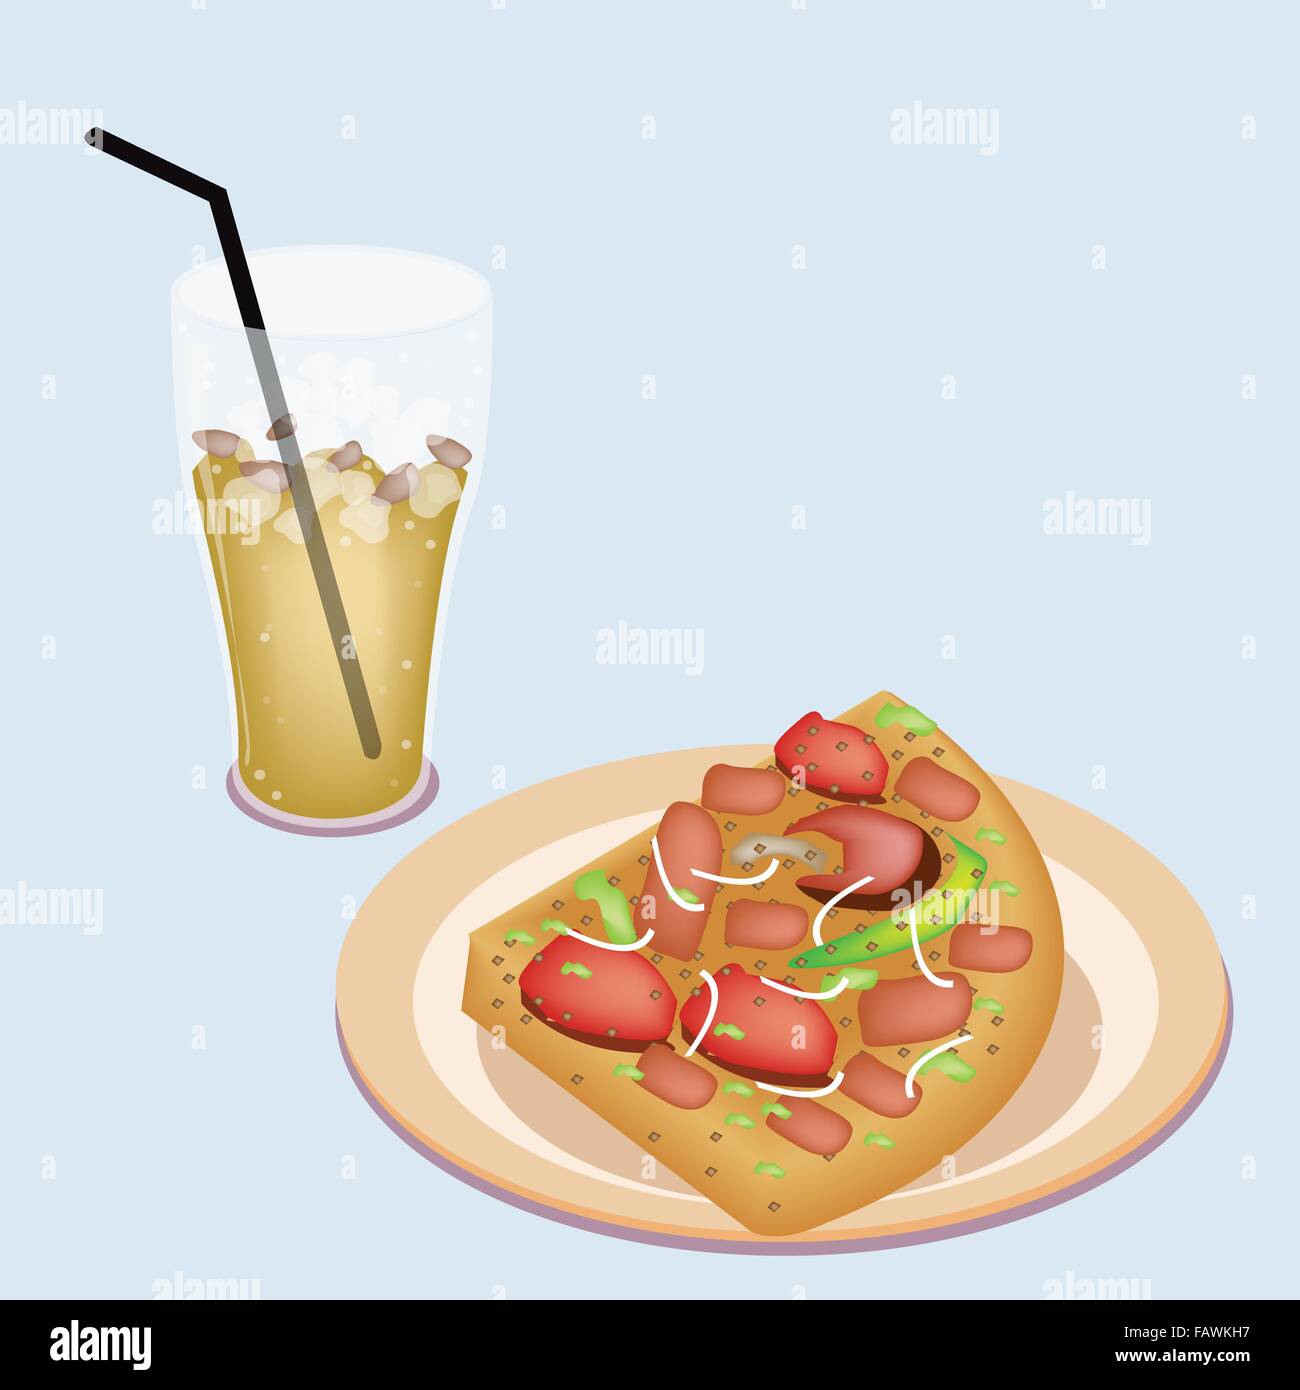 An Illustration of Serving Delicious Pepperoni Pizza with Fresh Tomato, Pesto Sauce, Olives, Basil Leaves and Gobs of Mozzarella Stock Vector